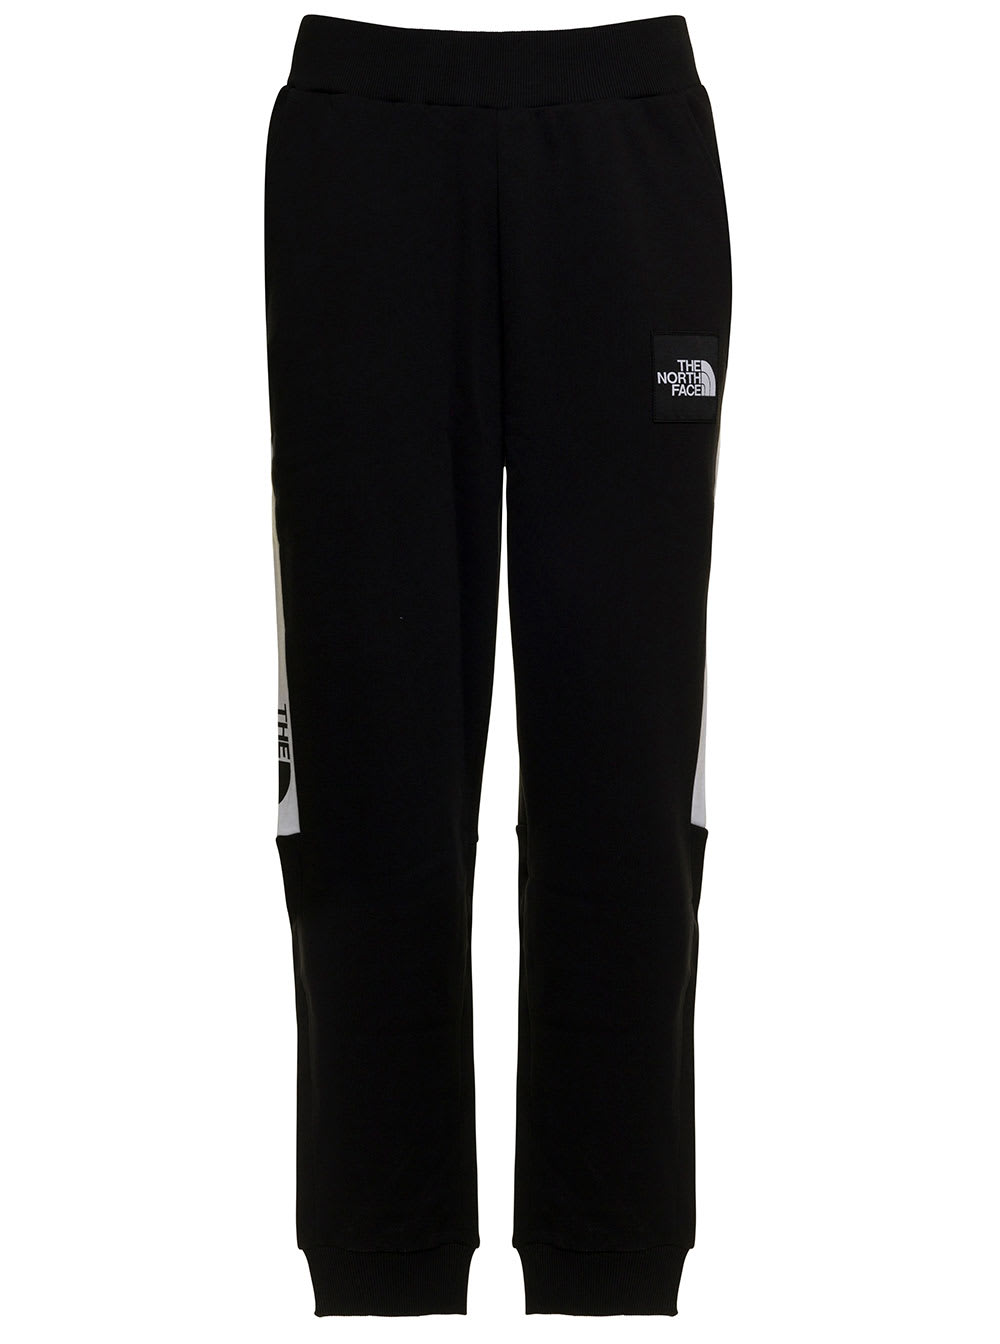 The North Face Mens Black Cotton Joggers